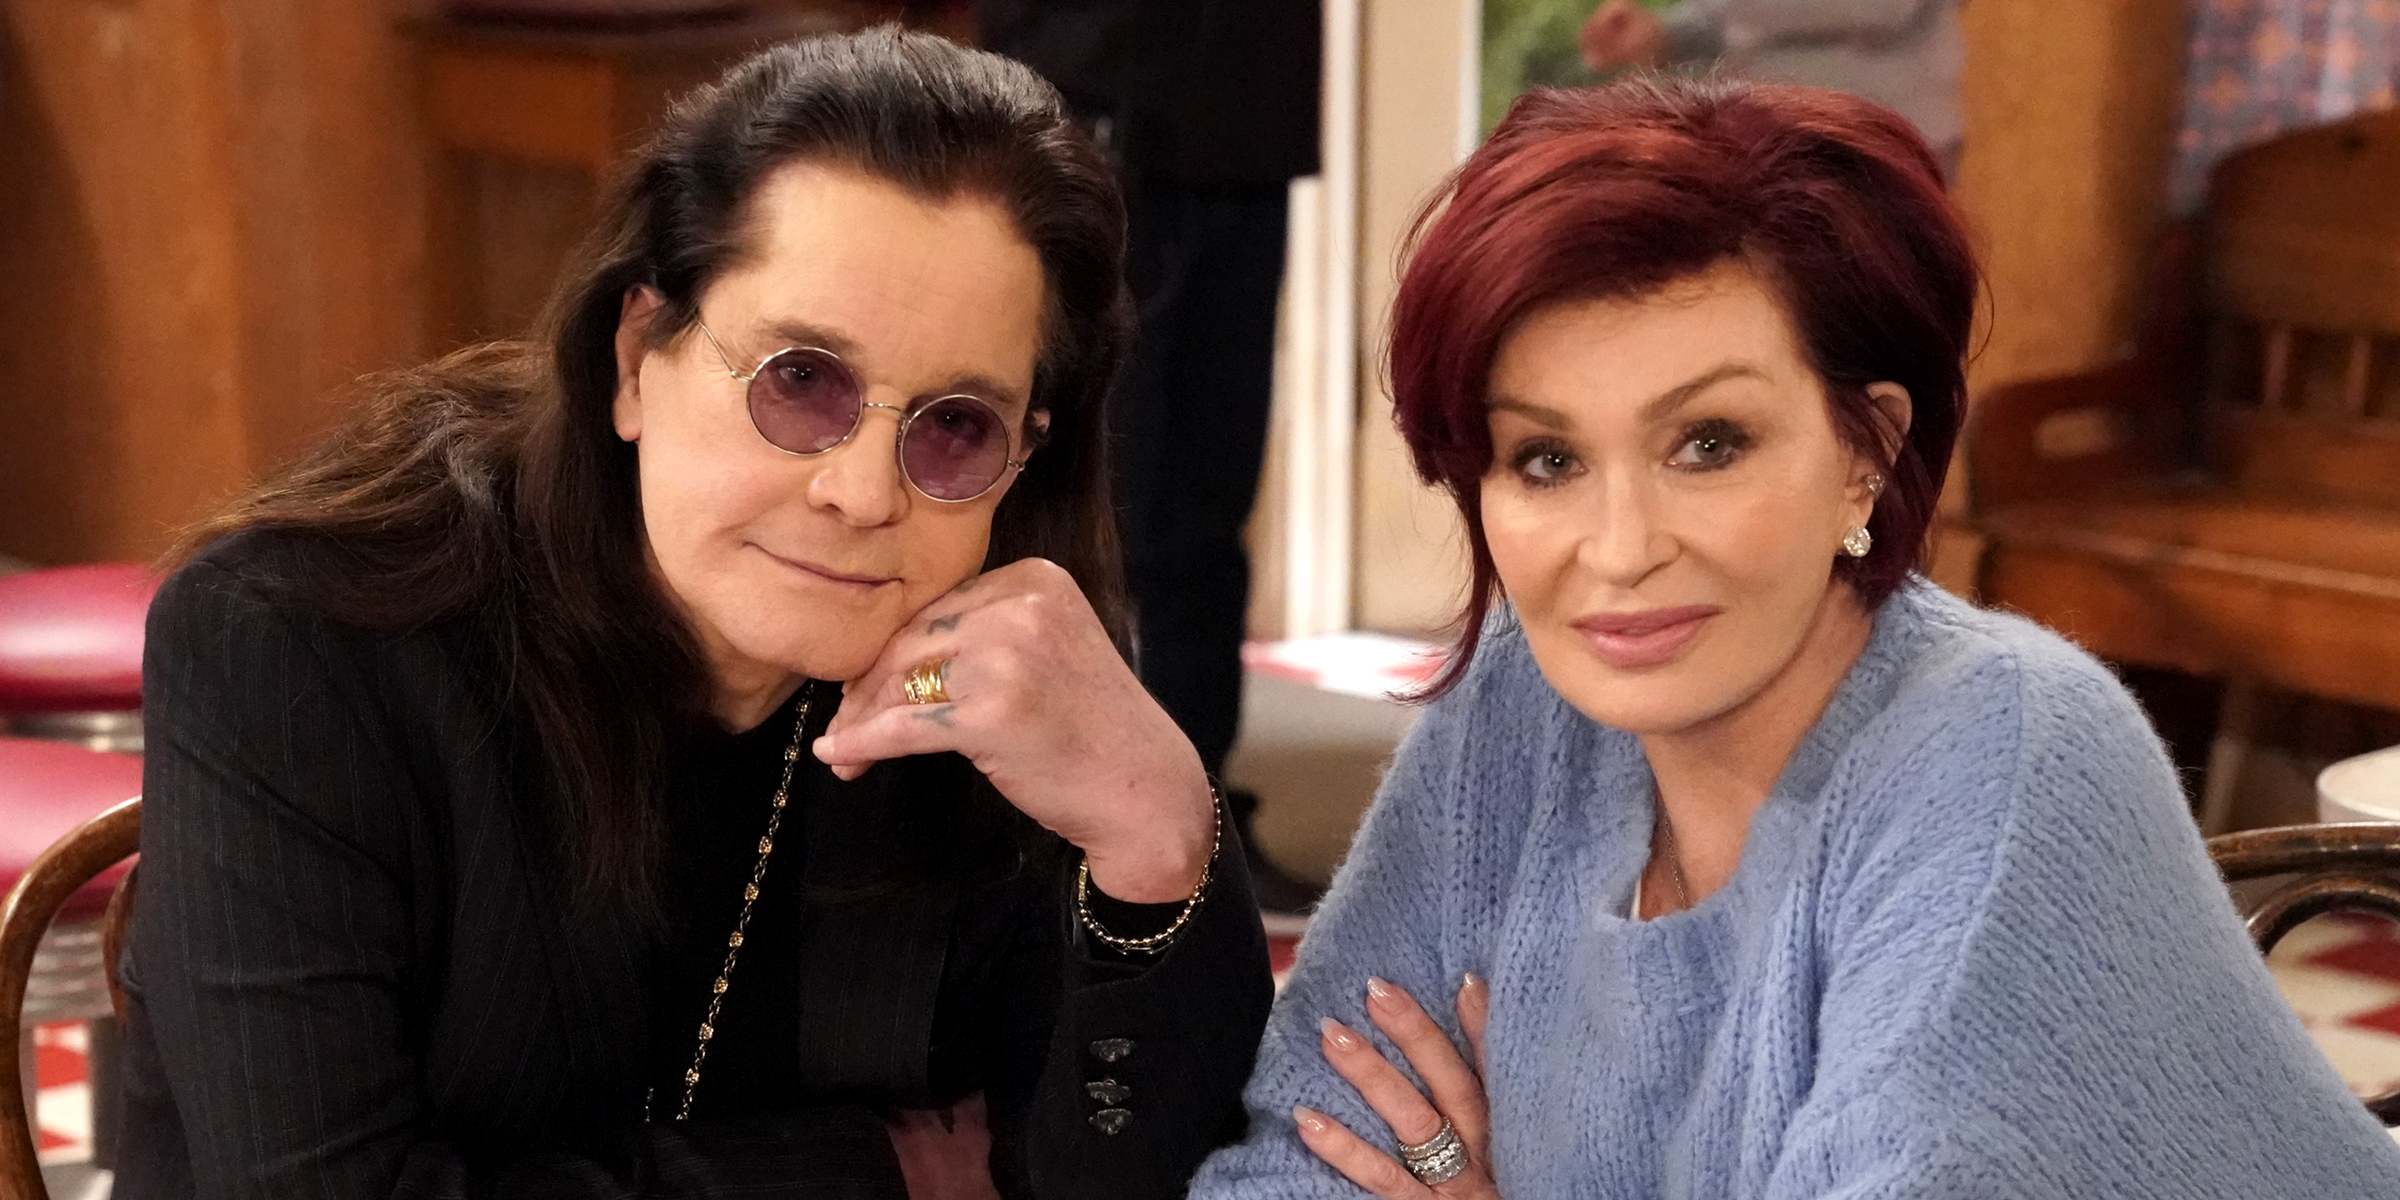 Ozzy and Sharon Osbourne | Source: Getty Images